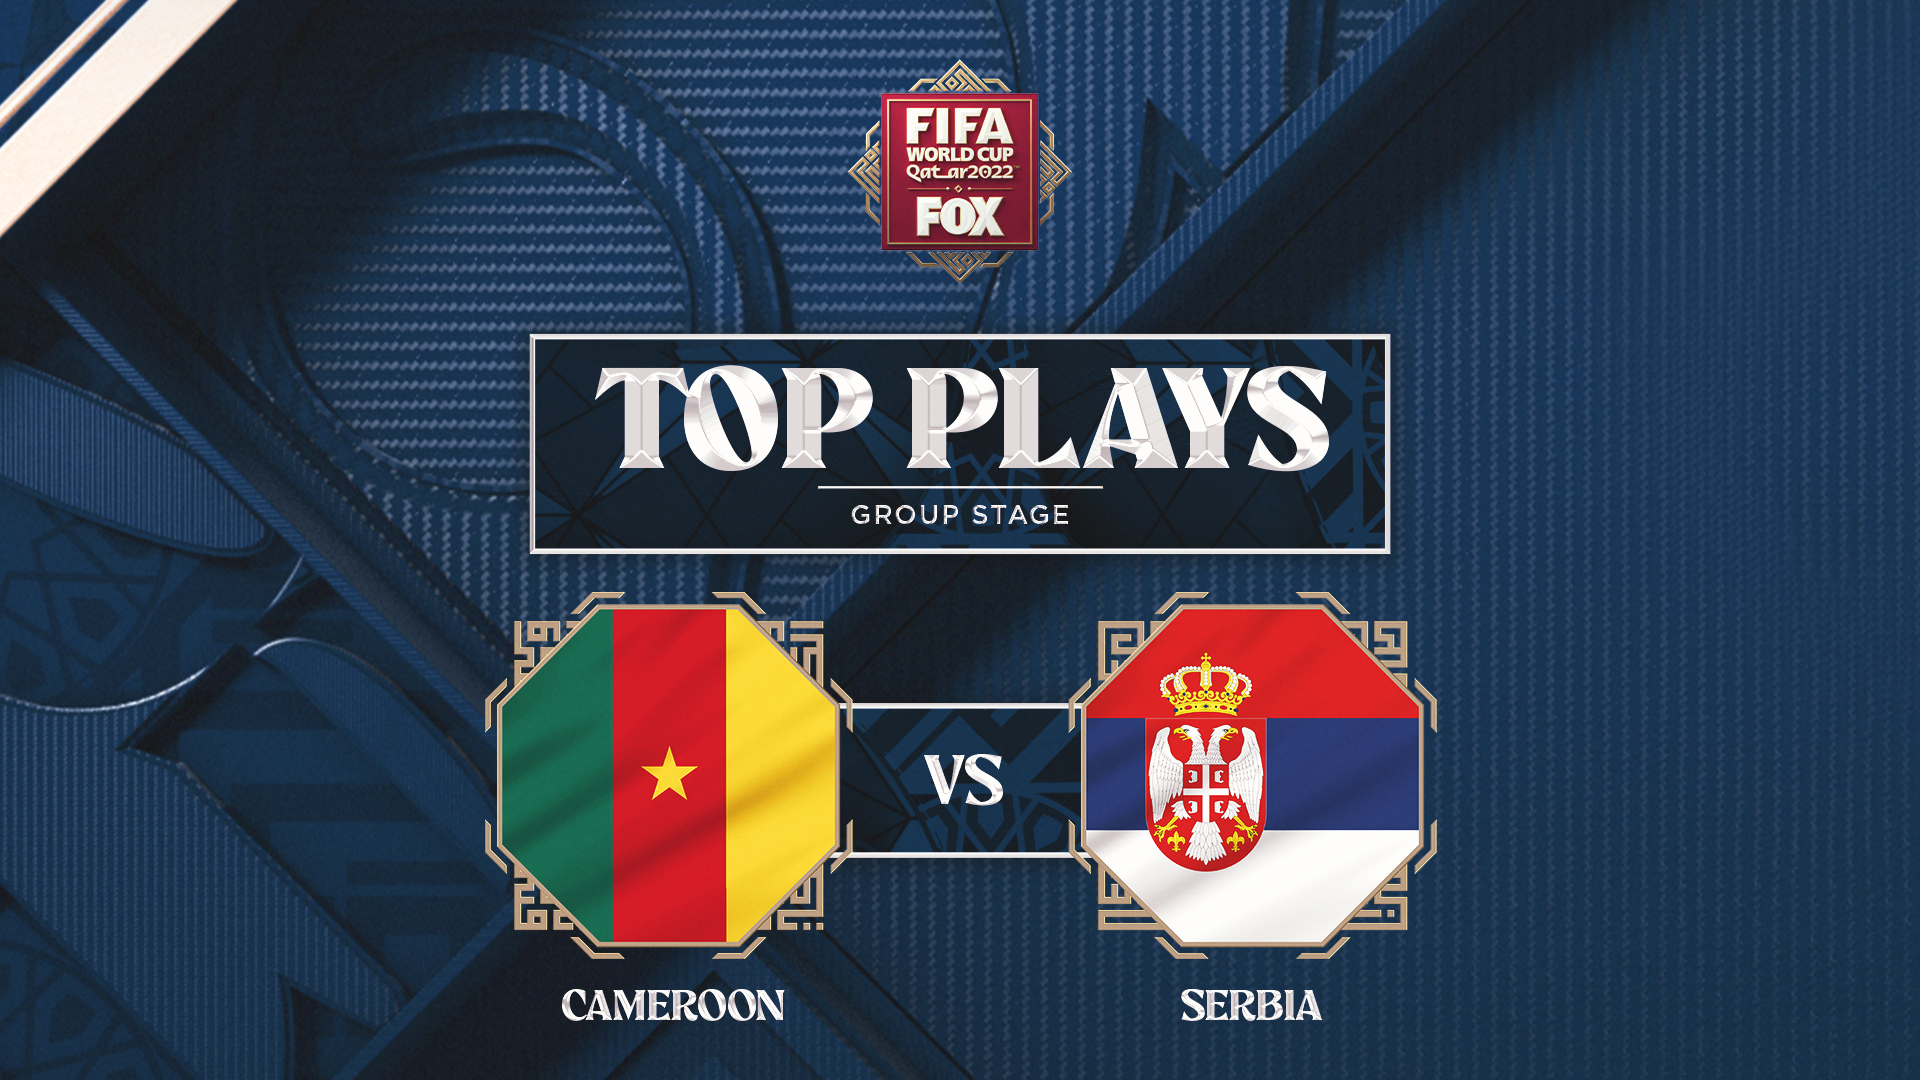 World Cup 2022 live updates: Serbia takes 2-1 lead into half vs. Cameroon thumbnail